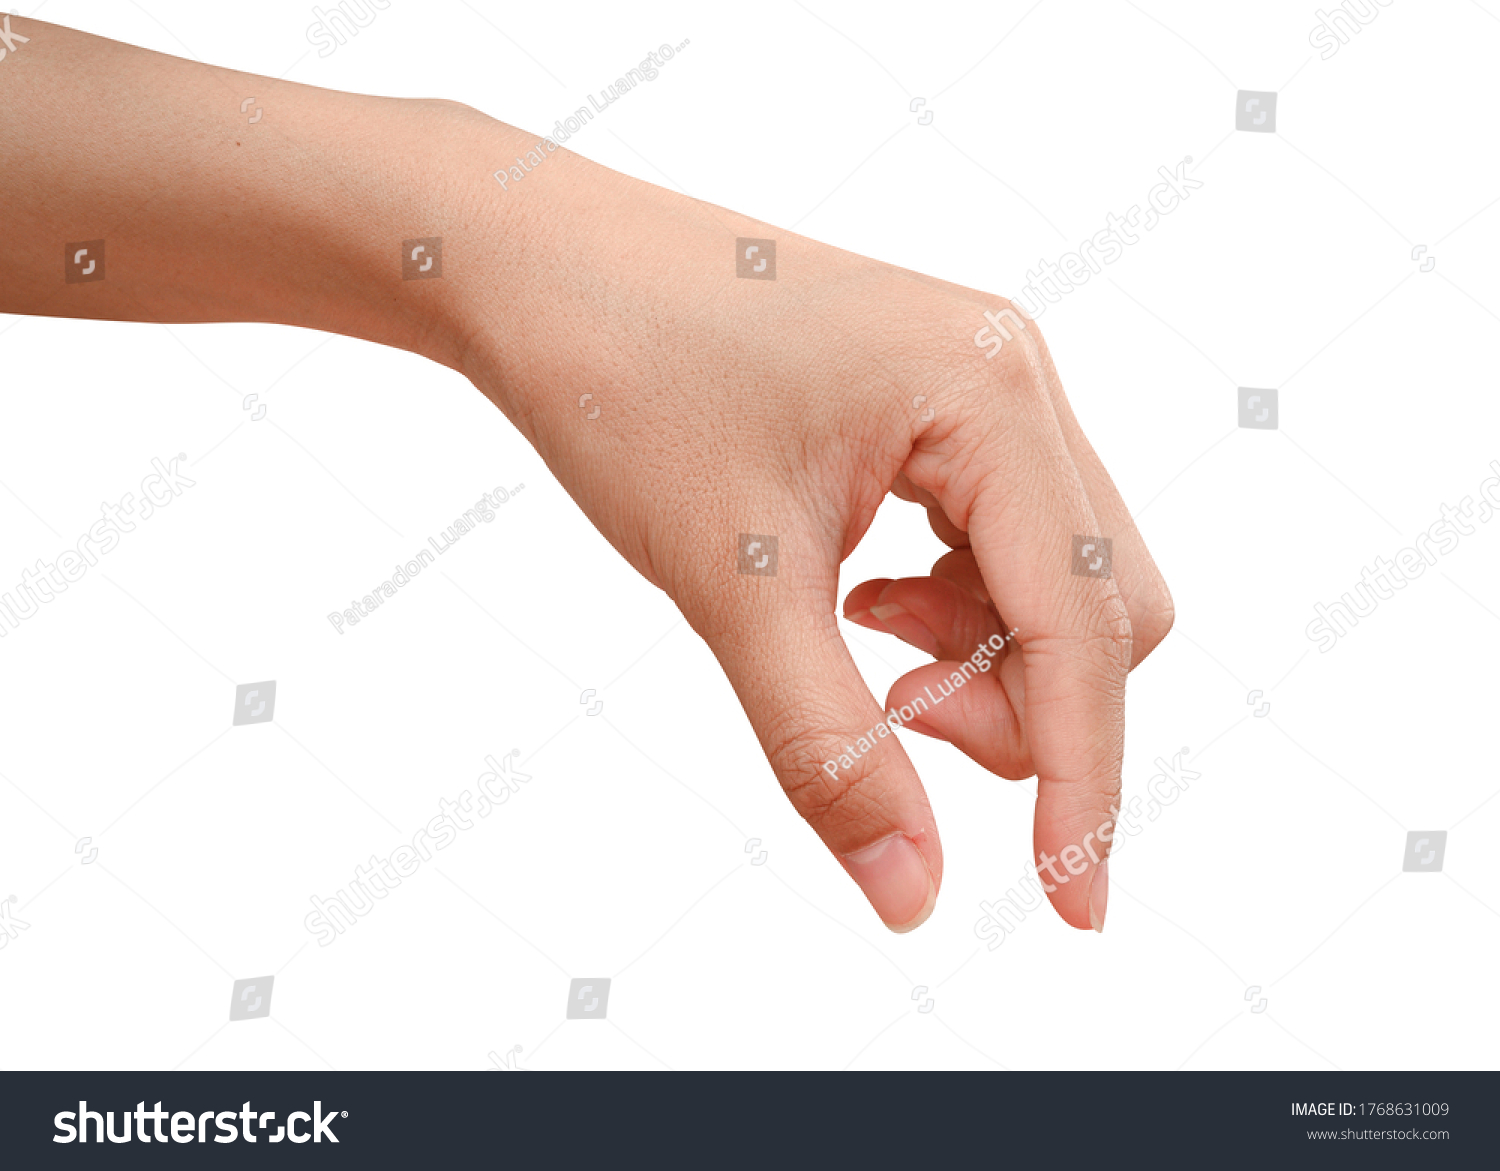 Close up hand holding something like a bottle or can isolated on white background with clipping path. #1768631009